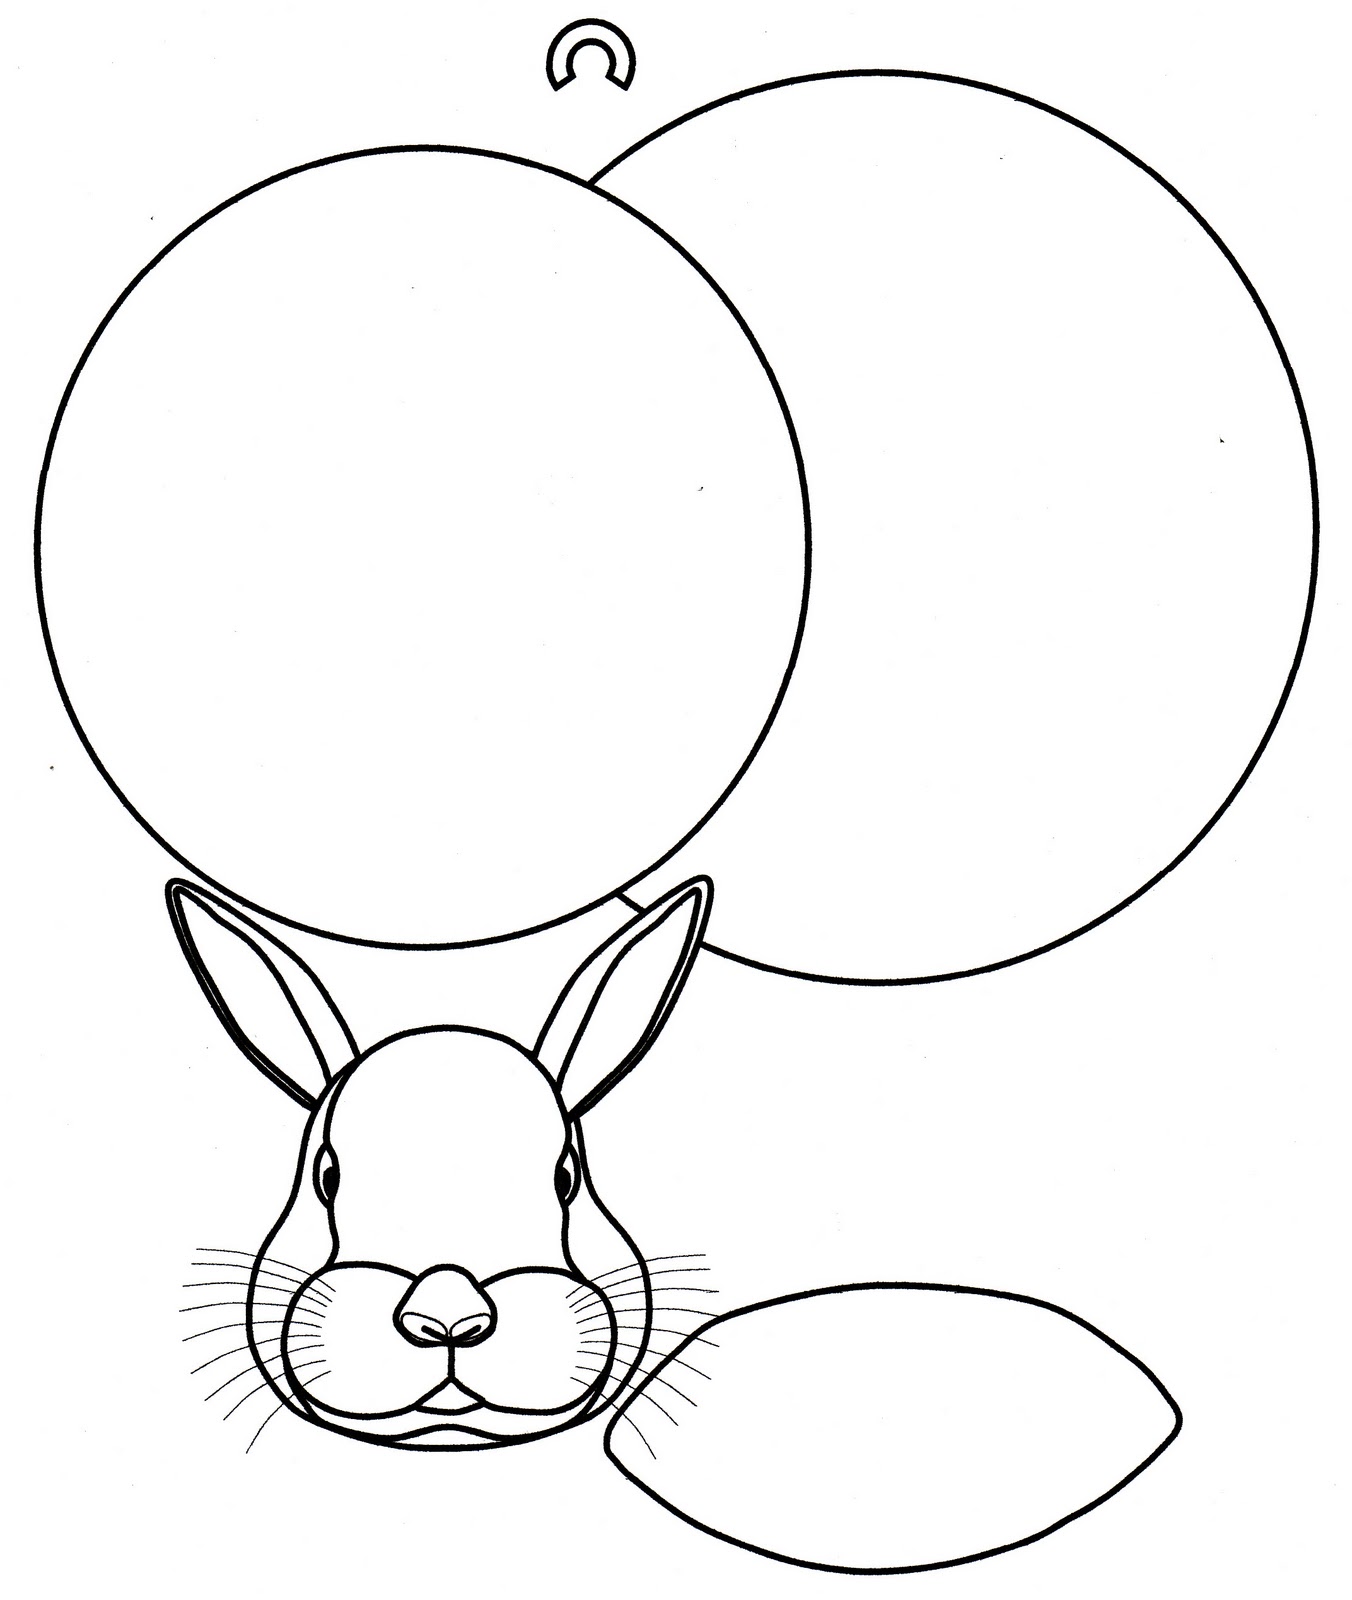 Rabbit Drawing Outline - ClipArt Best